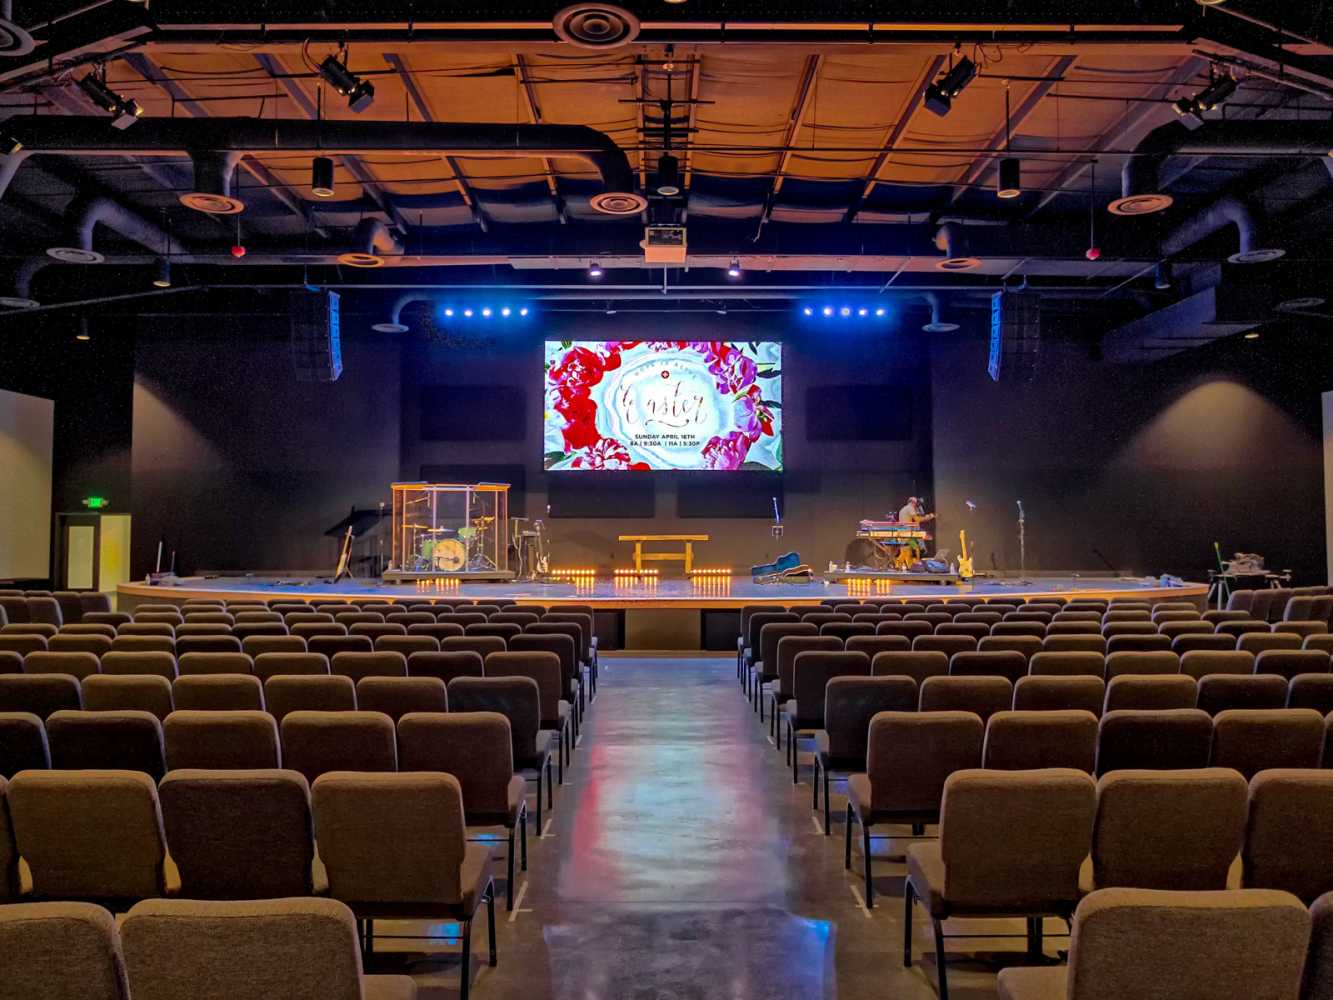 Grace Orlando church recently opened the doors of its first designated worship space